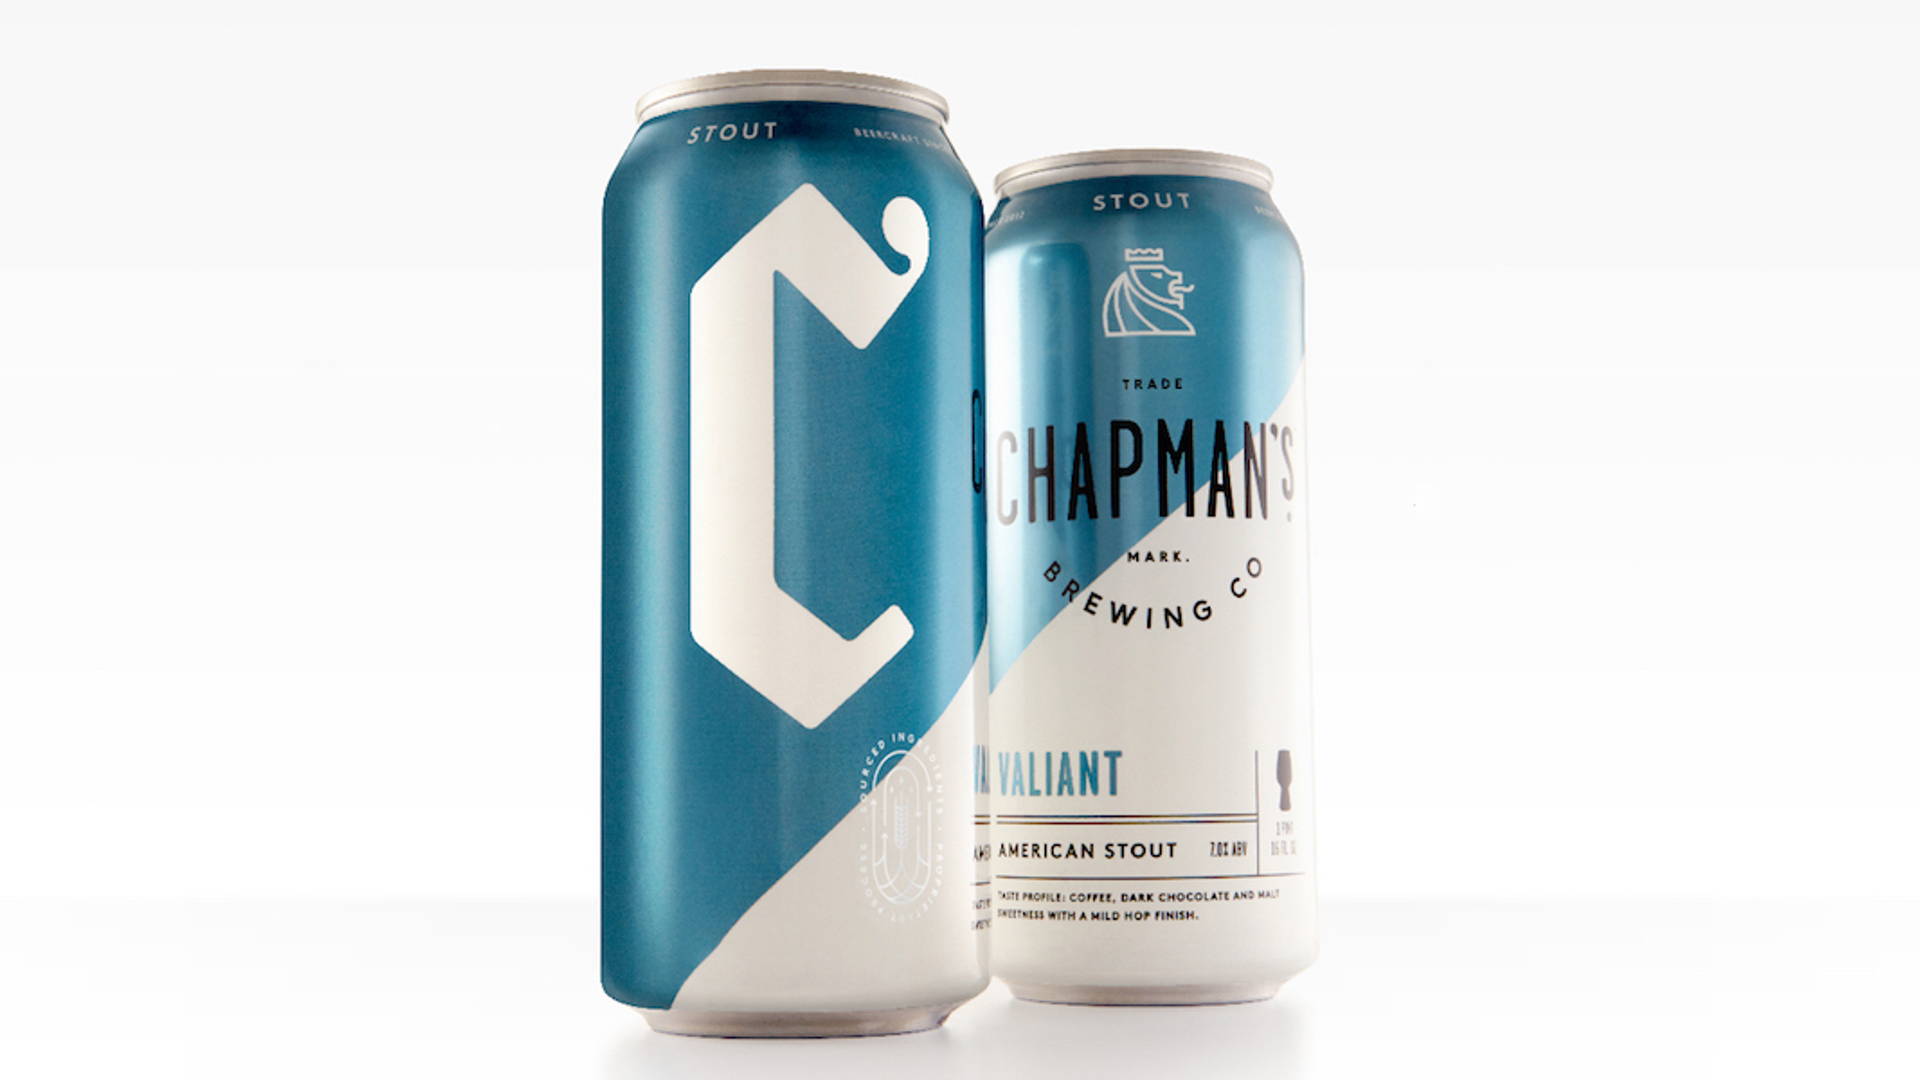 Featured image for Chapman's Brewing Co.